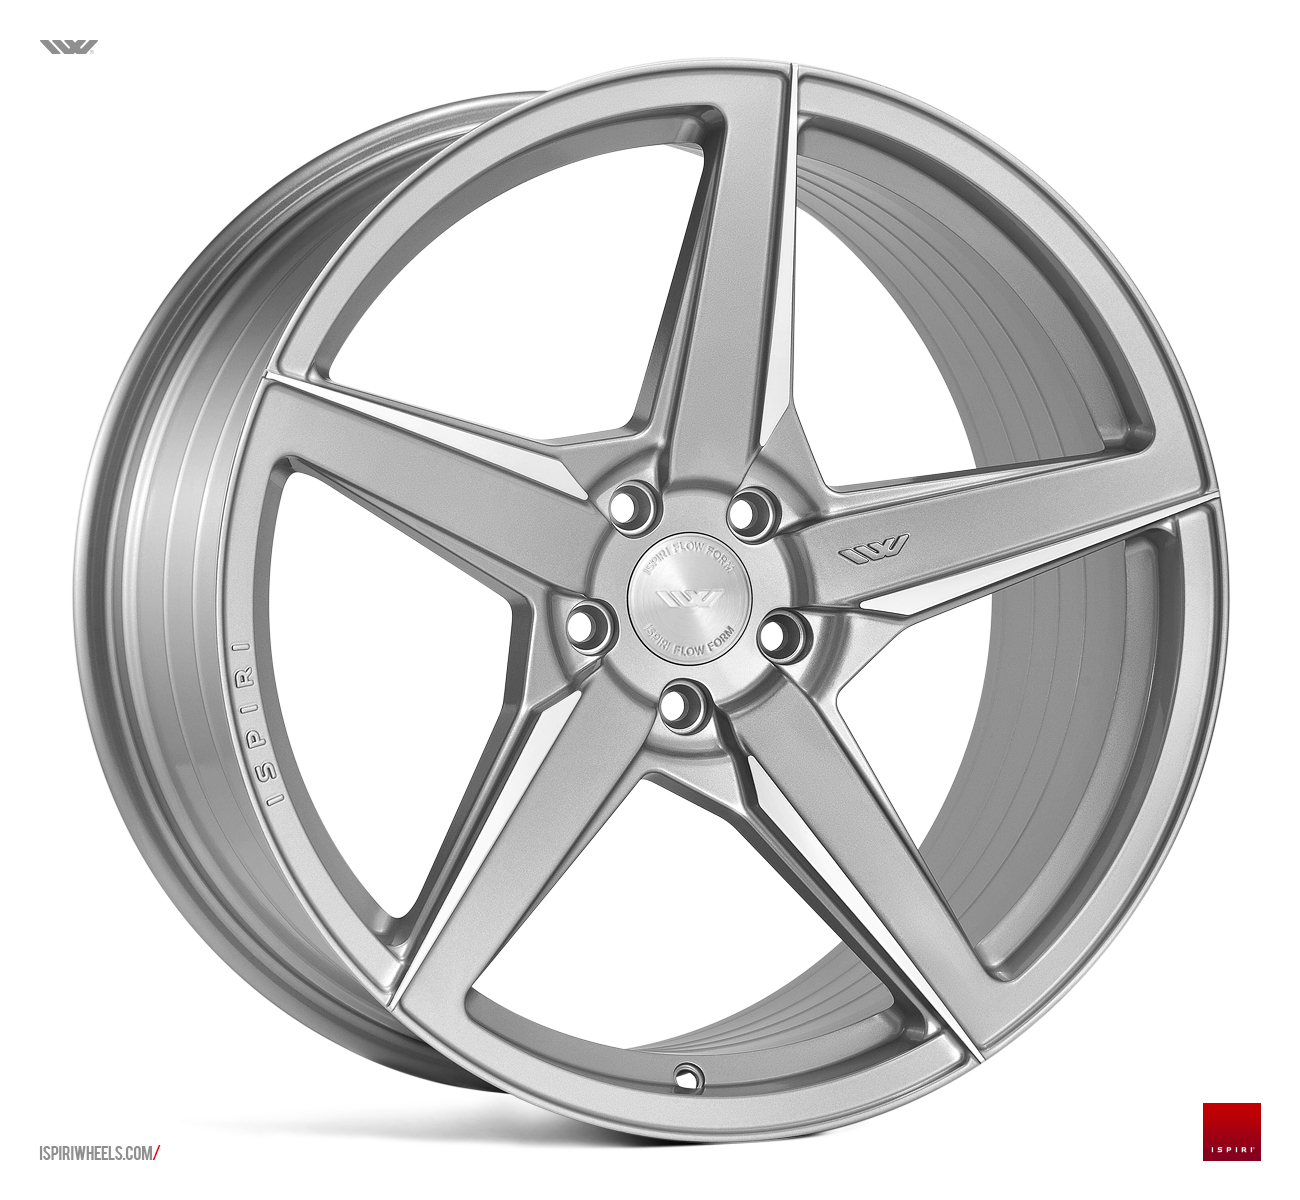 NEW 20  ISPIRI FFR5 5 SPOKE ALLOY WHEELS IN PURE SILVER BRUSHED  VARIOUS FITMENTS AVAILABLE